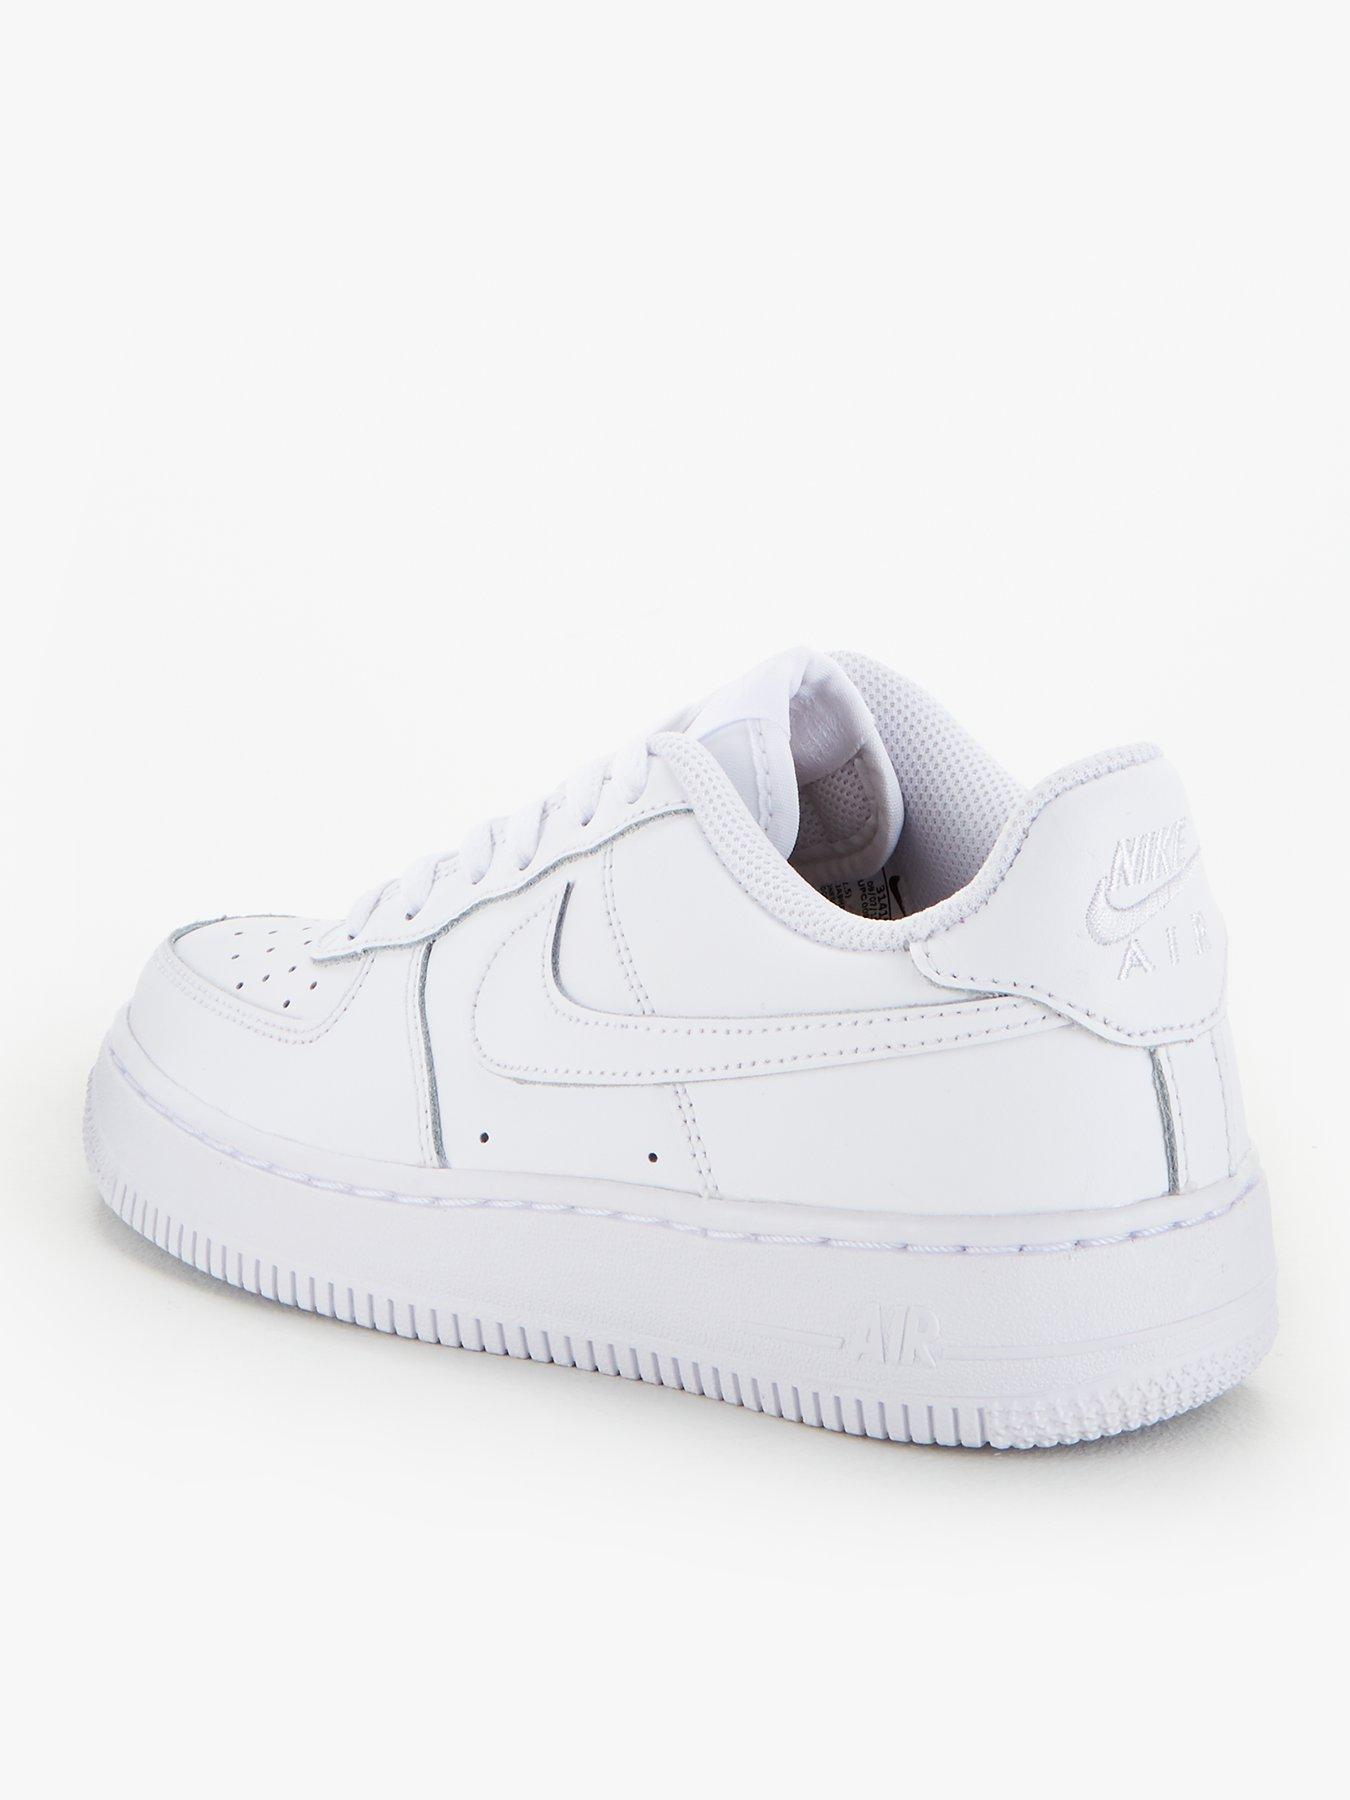 air force 1 junior size 6.5